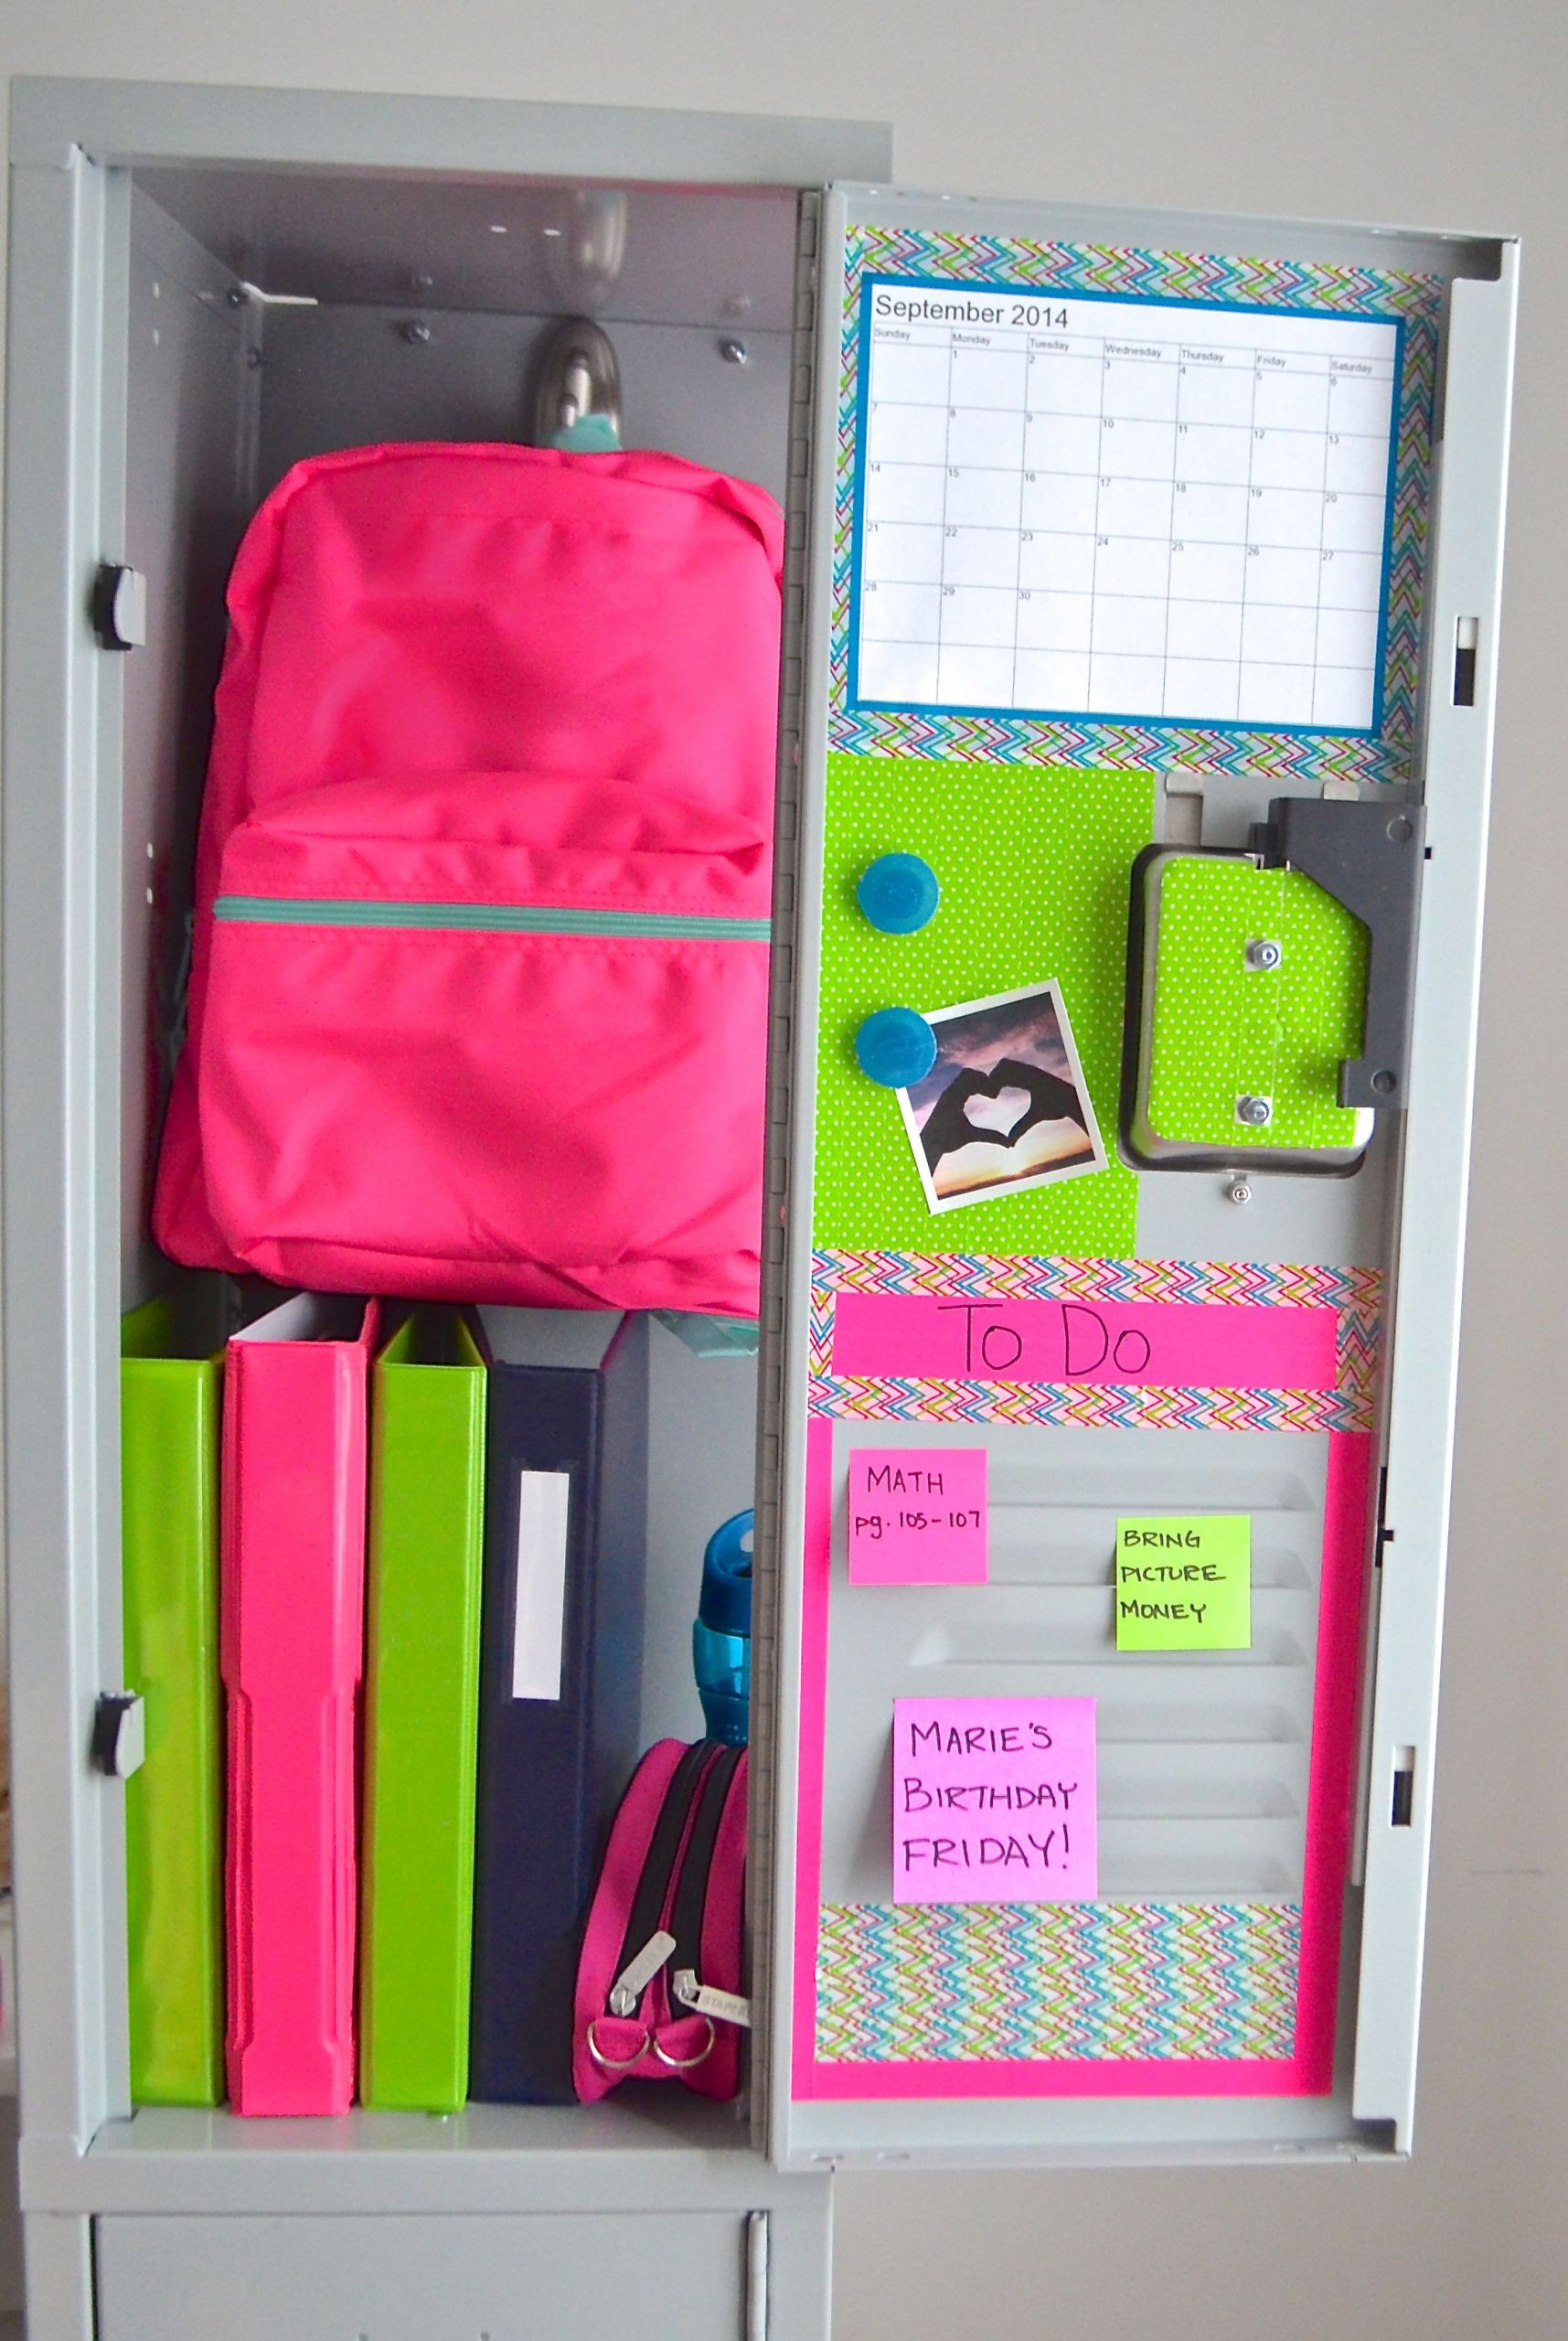 DIY Locker Decorations With Household Items
 Have an awesome locker Don t hide it submit it Enter